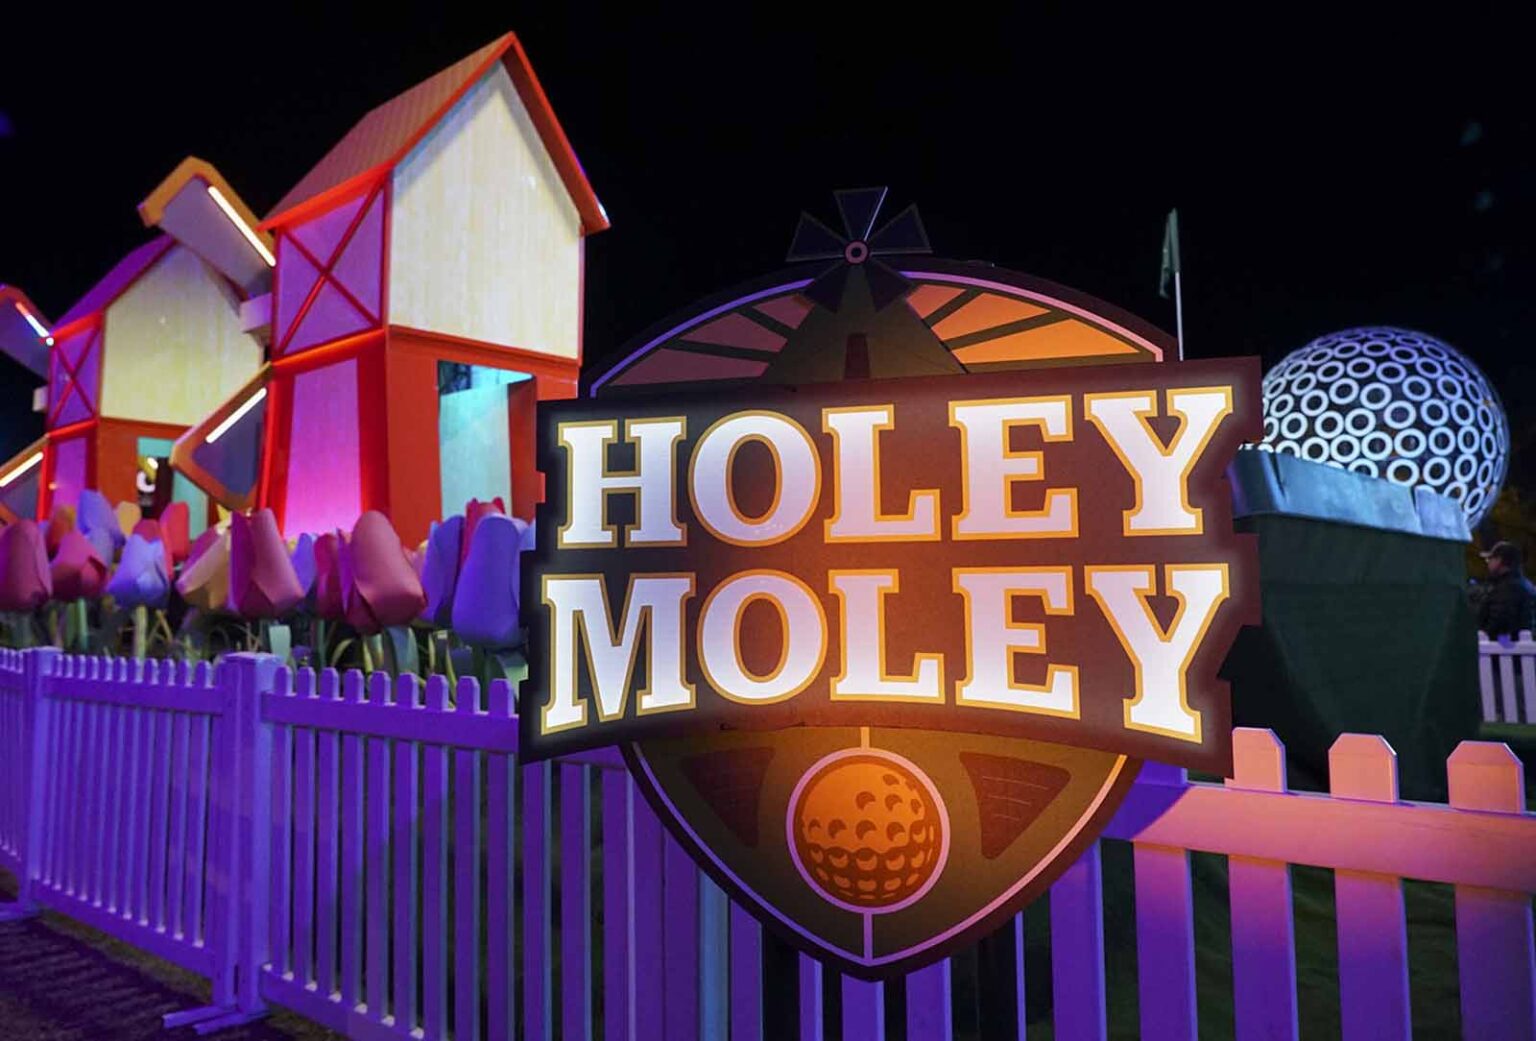 'Holey Moley', which premiered in 2019, brings together contestants to battle it out on a miniature golf. Here's why you need to tune in.